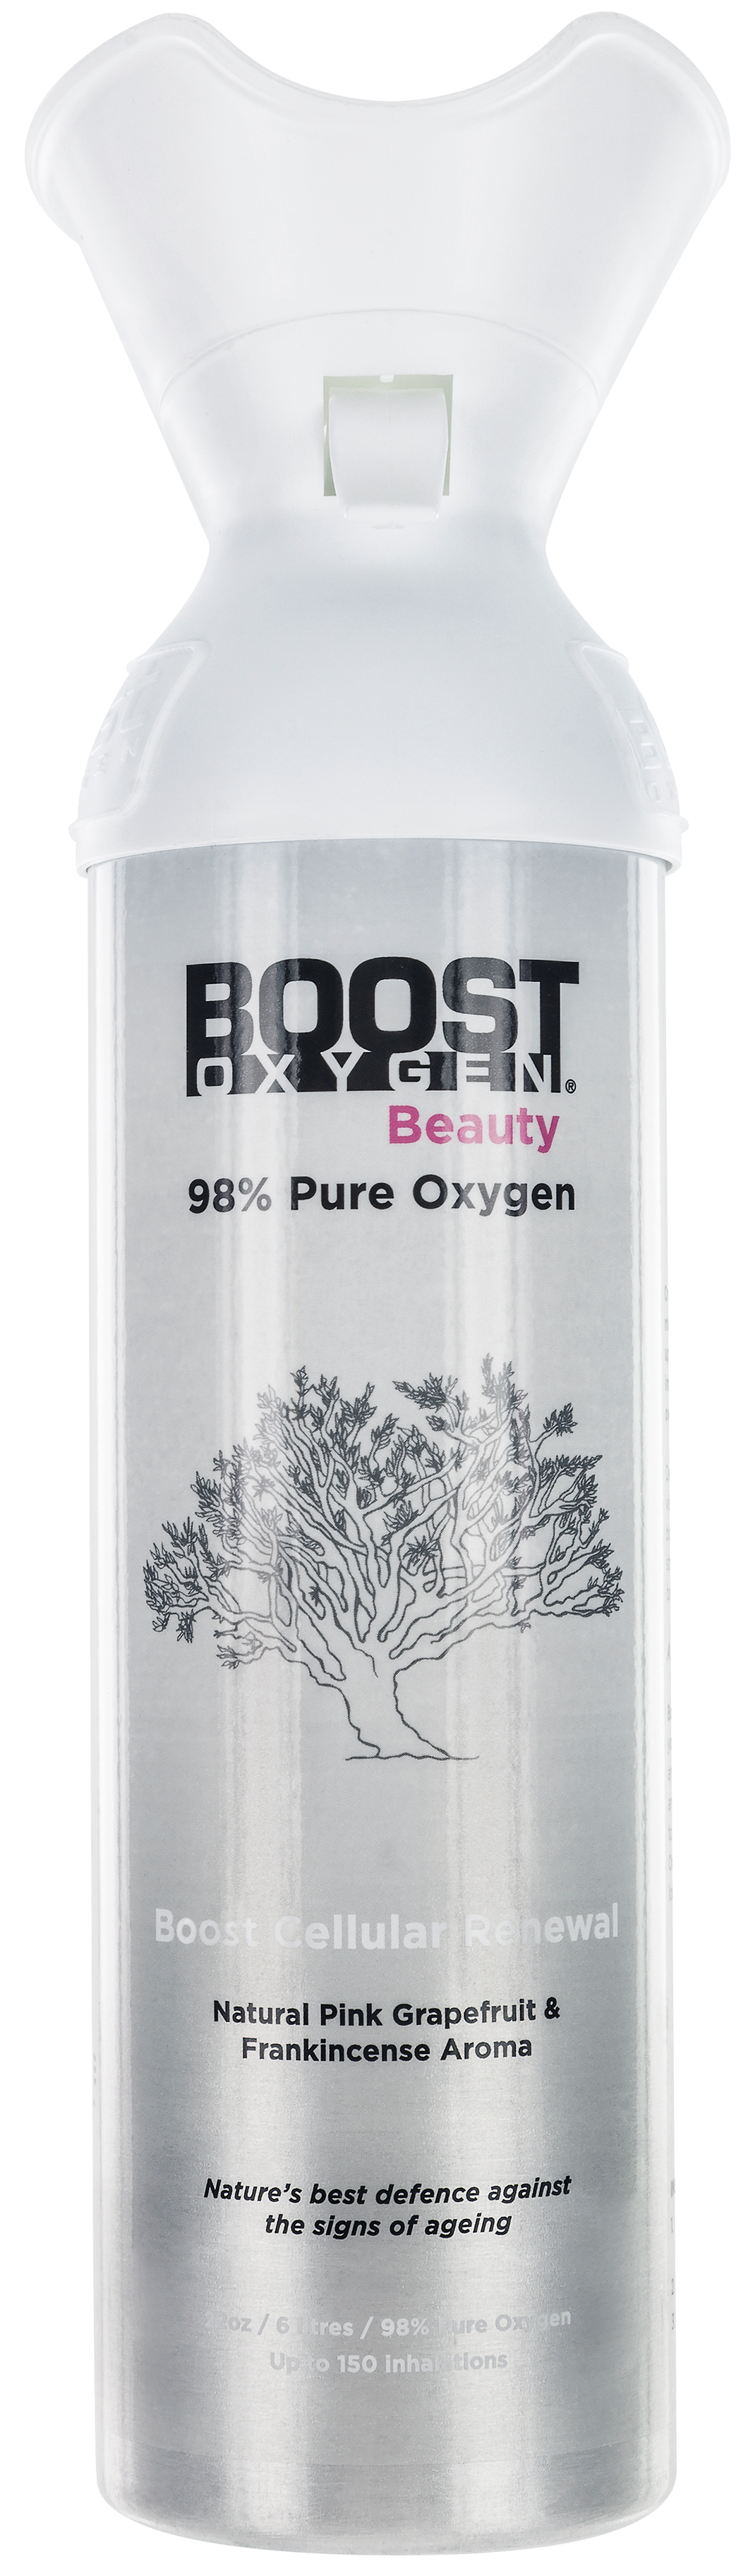 Beauty 98% Pure Supplemental Oxygen in a Portable Canister - 6 Liters